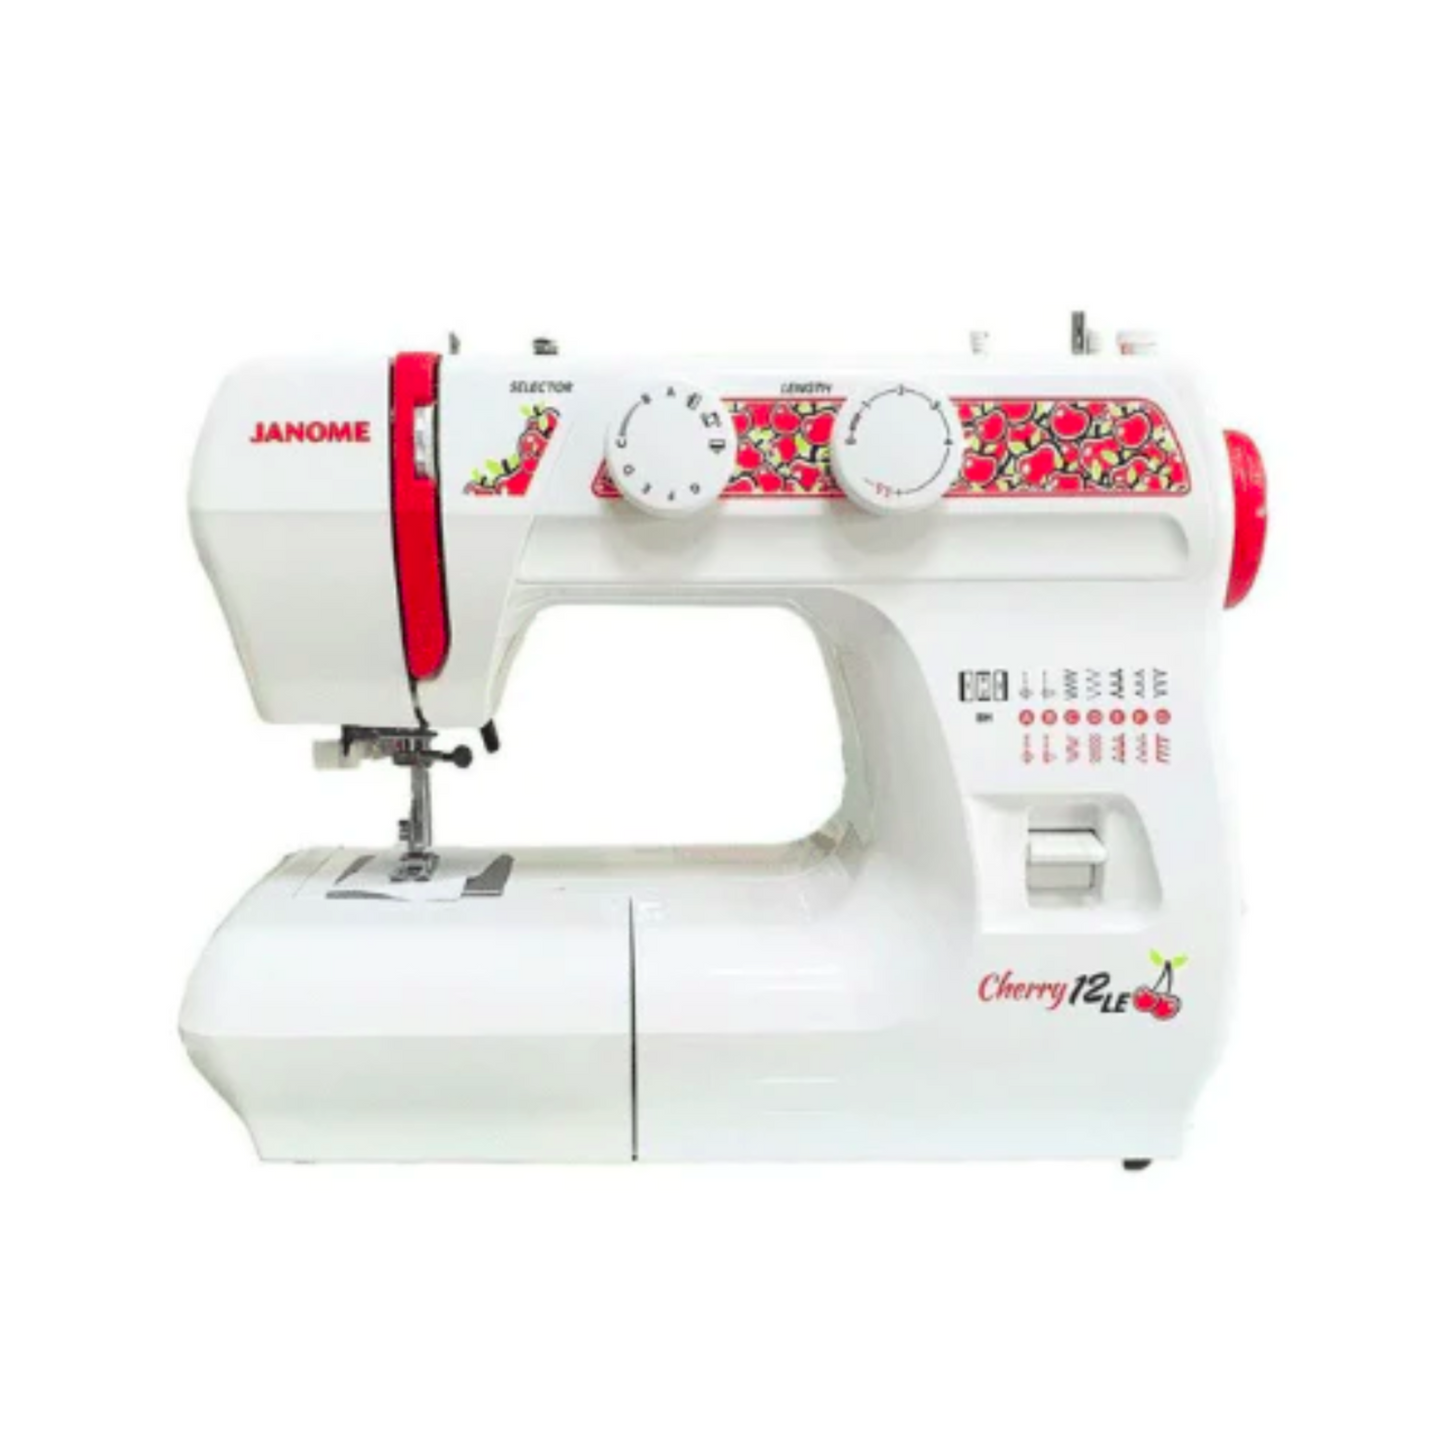 Janome cherry 12LE - Sewing machine - Cherry - Front view